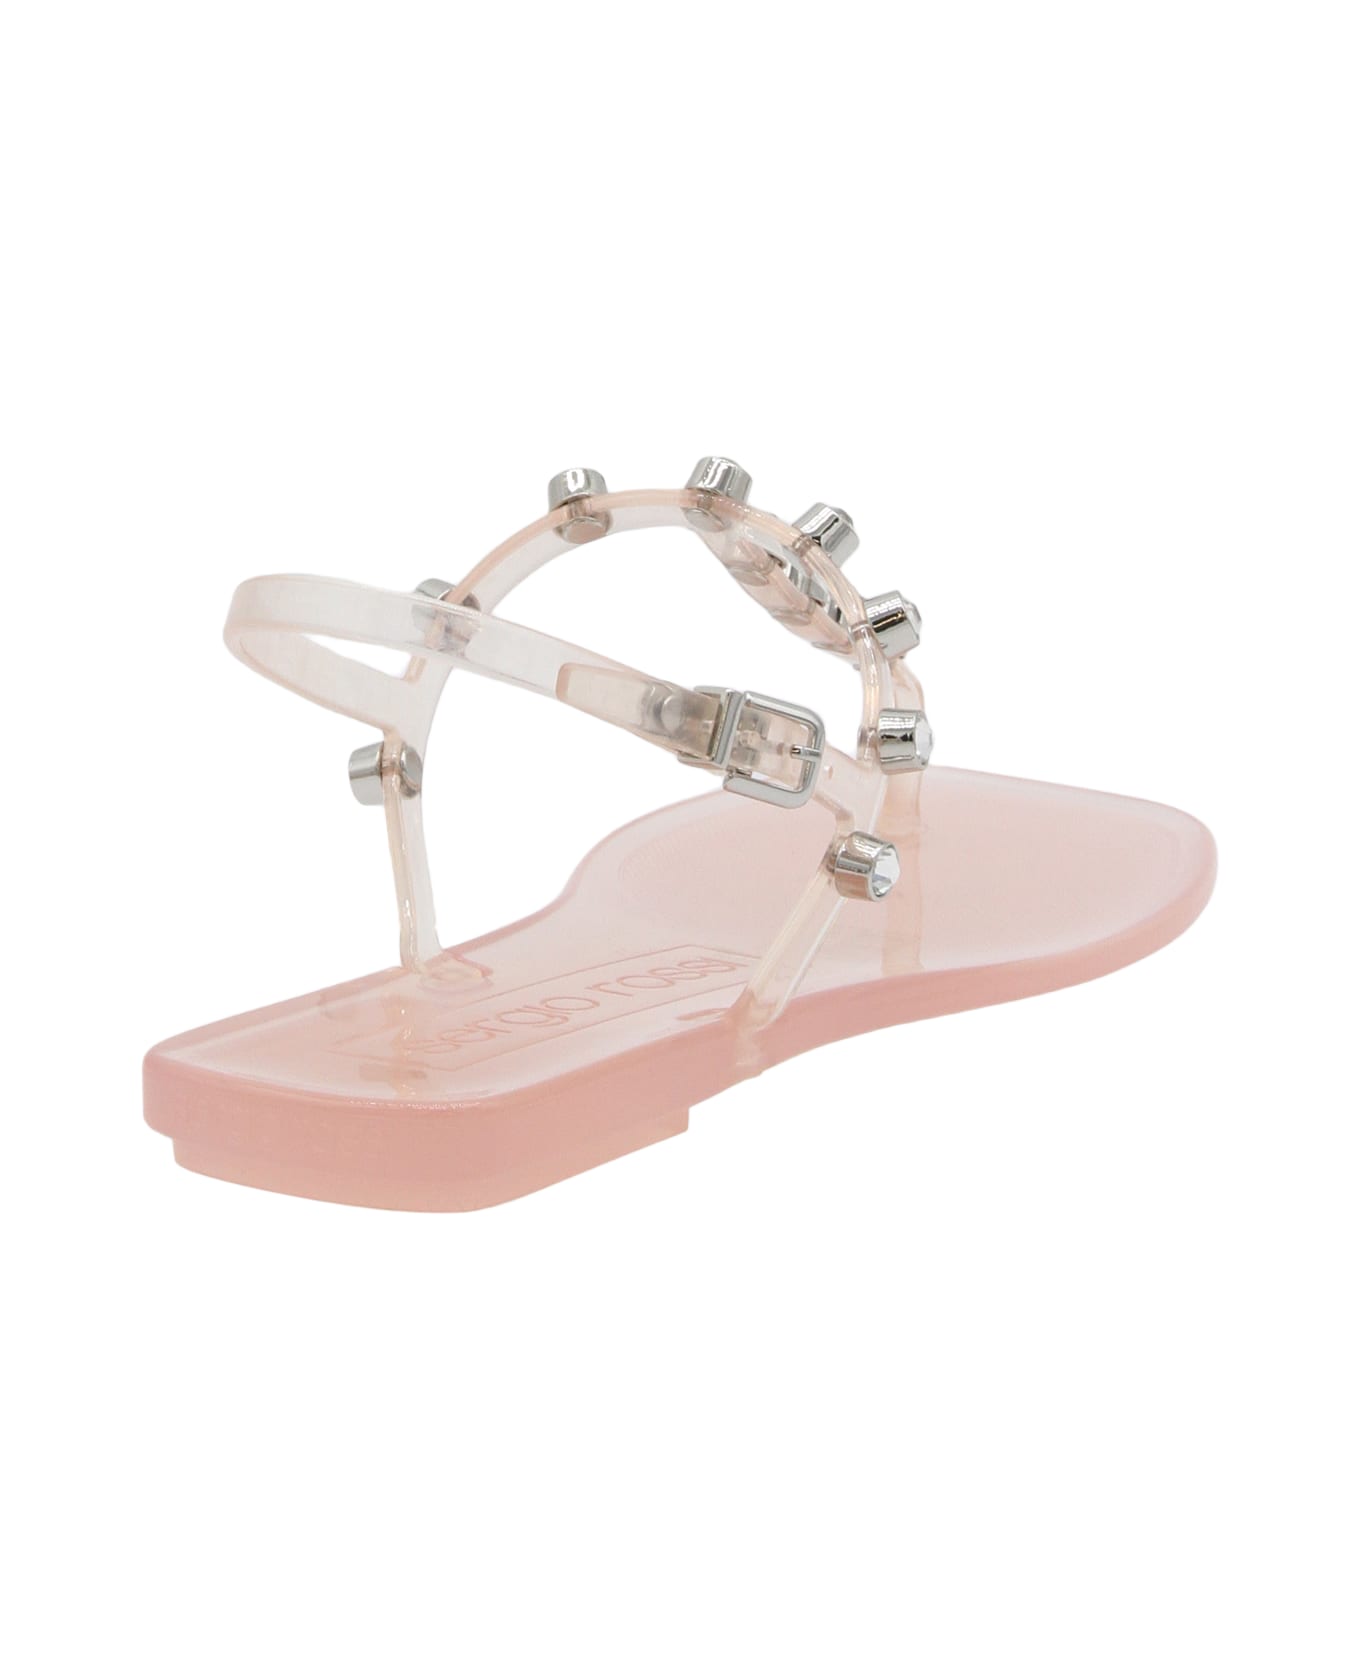 Sergio Rossi Powder Pink Rubber Sr1 Jelly Flats - Pink